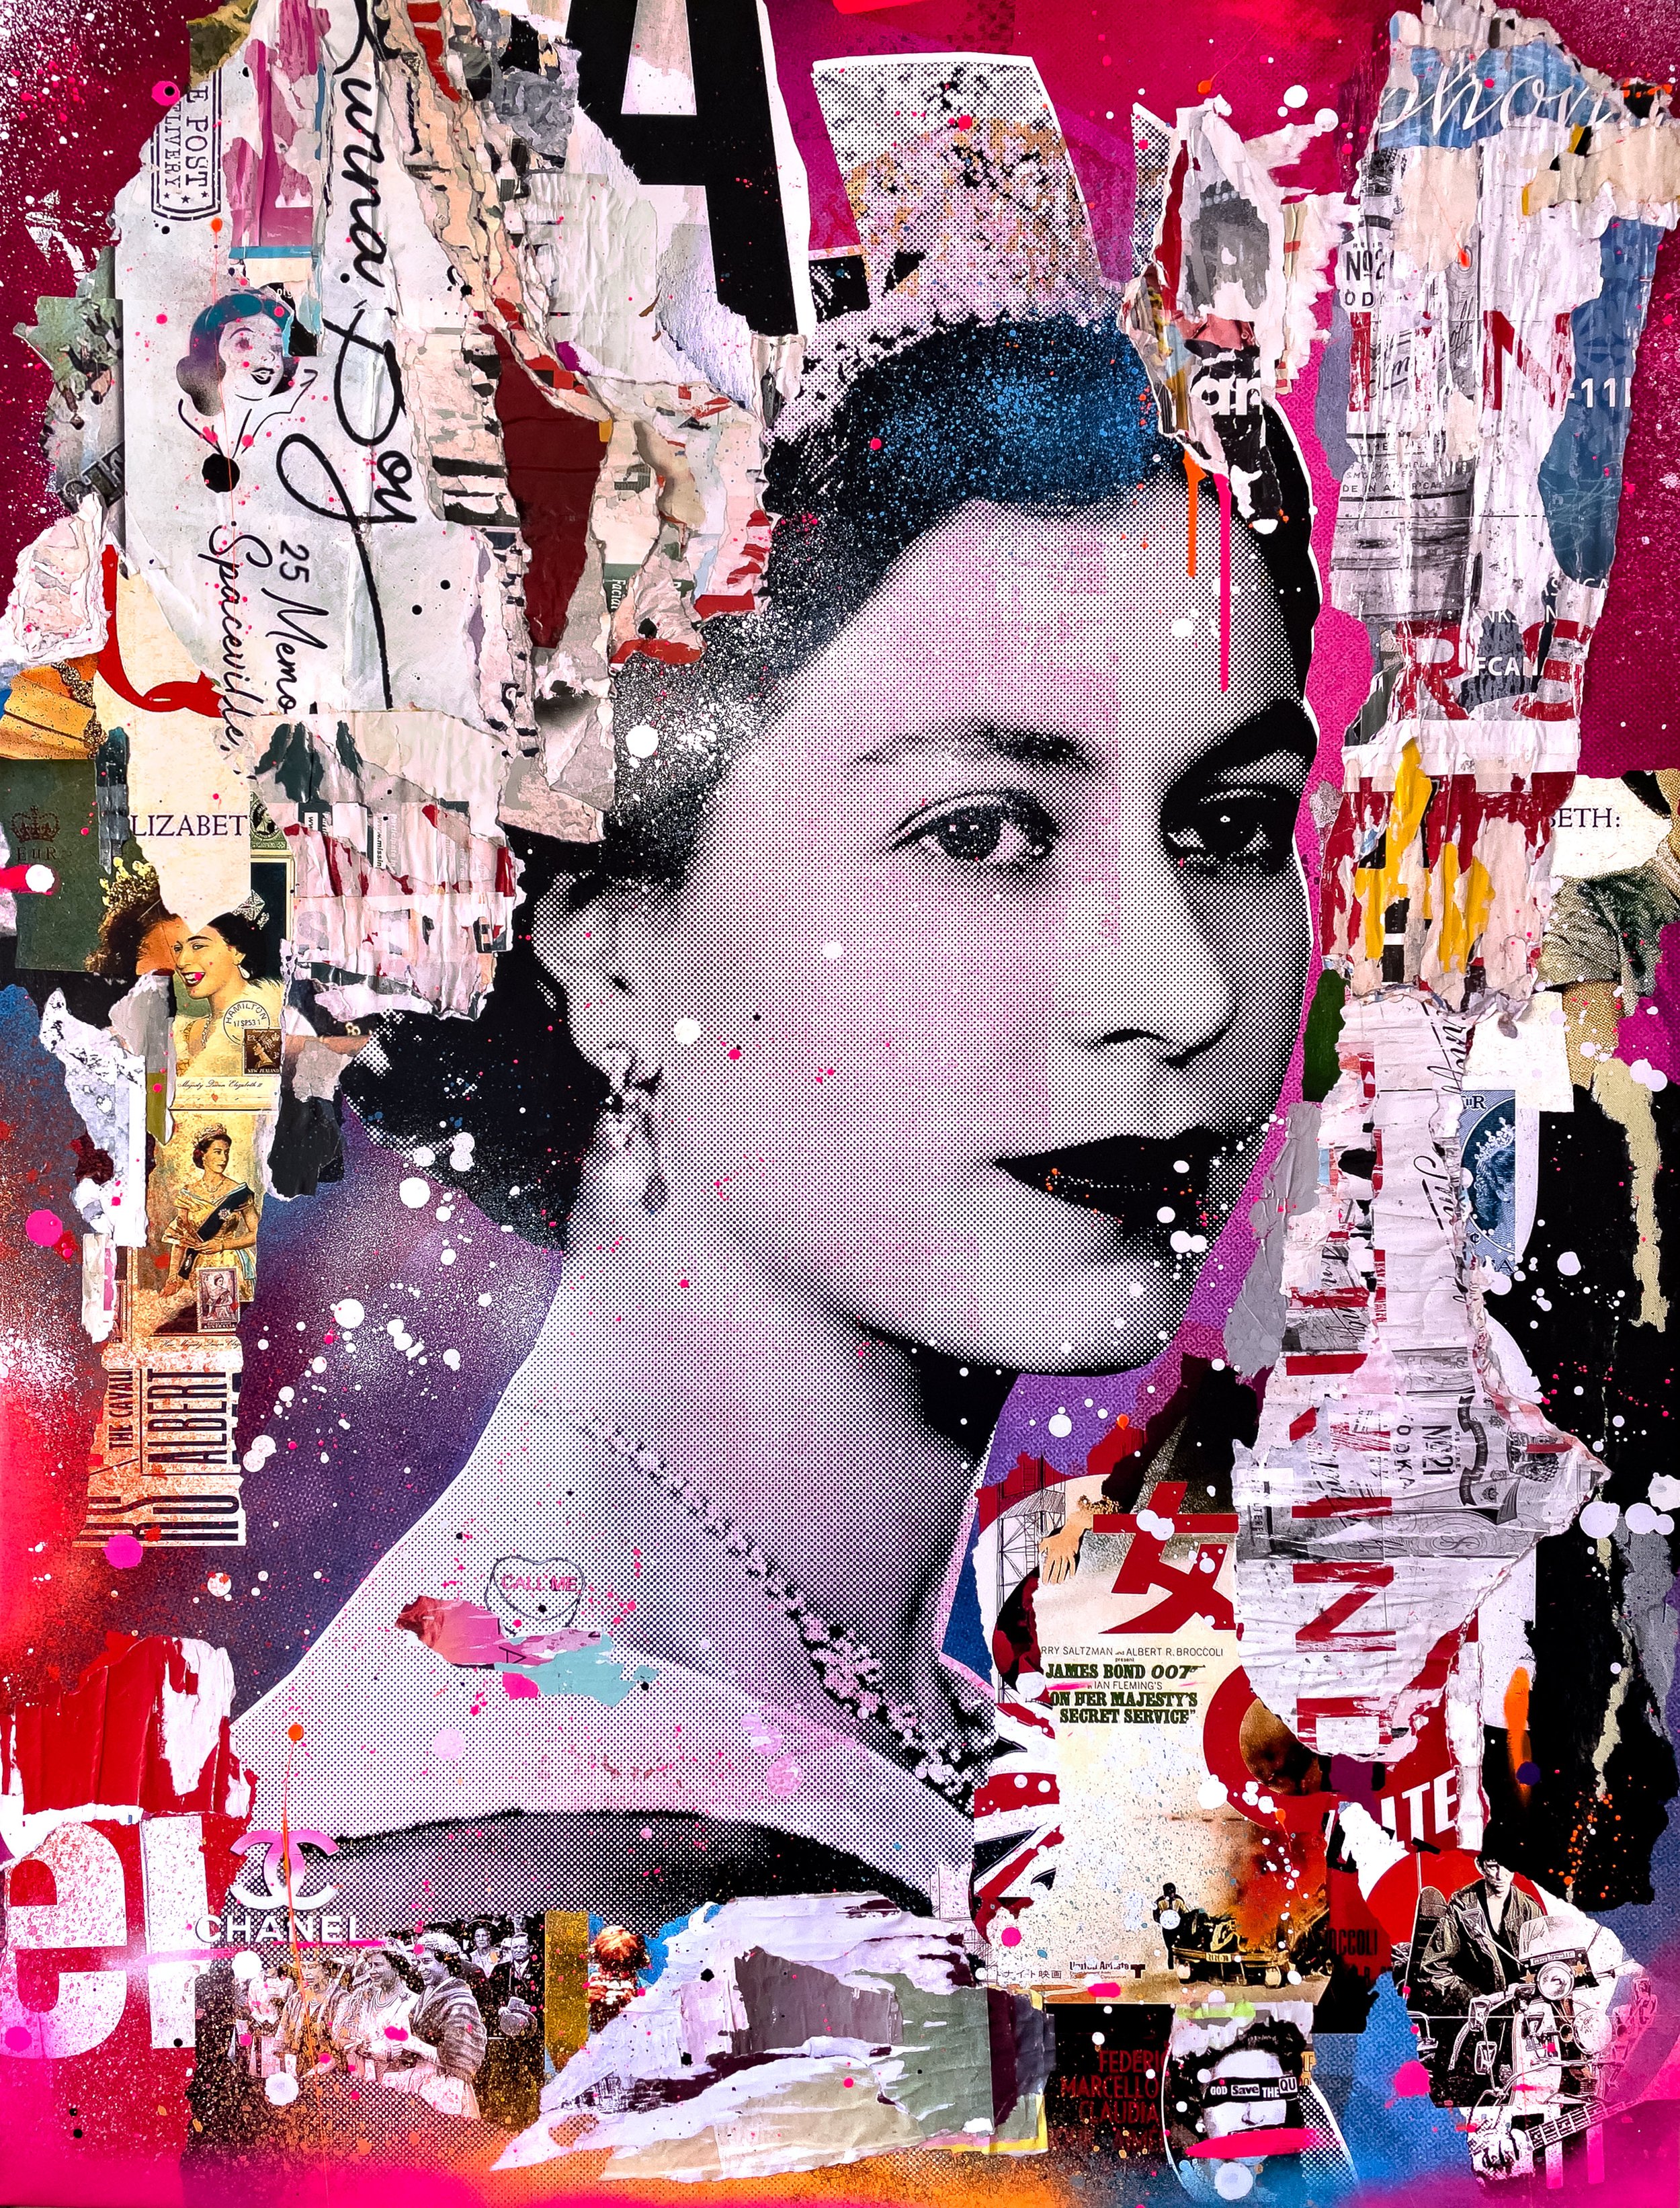 "God Save The Queen" 2022. 72"x54" Pigment, spray &amp; acrylic paint, paper, glue &amp; varnish on canvas